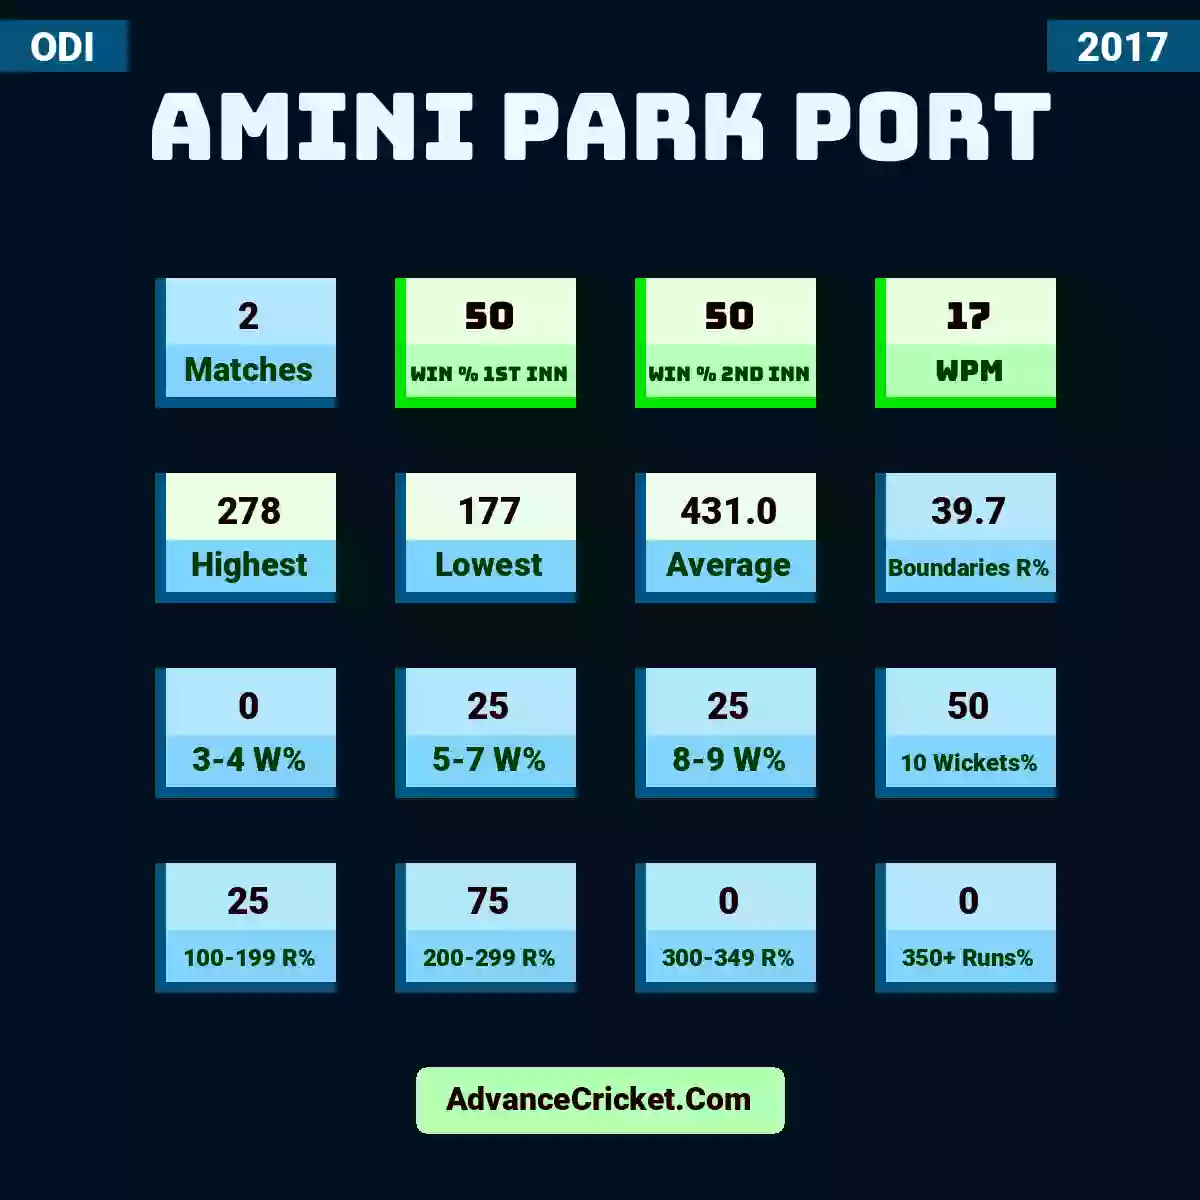 Image showing Amini Park Port with Matches: 2, Win % 1st Inn: 50, Win % 2nd Inn: 50, WPM: 17, Highest: 278, Lowest: 177, Average: 431.0, Boundaries R%: 39.7, 3-4 W%: 0, 5-7 W%: 25, 8-9 W%: 25, 10 Wickets%: 50, 100-199 R%: 25, 200-299 R%: 75, 300-349 R%: 0, 350+ Runs%: 0.